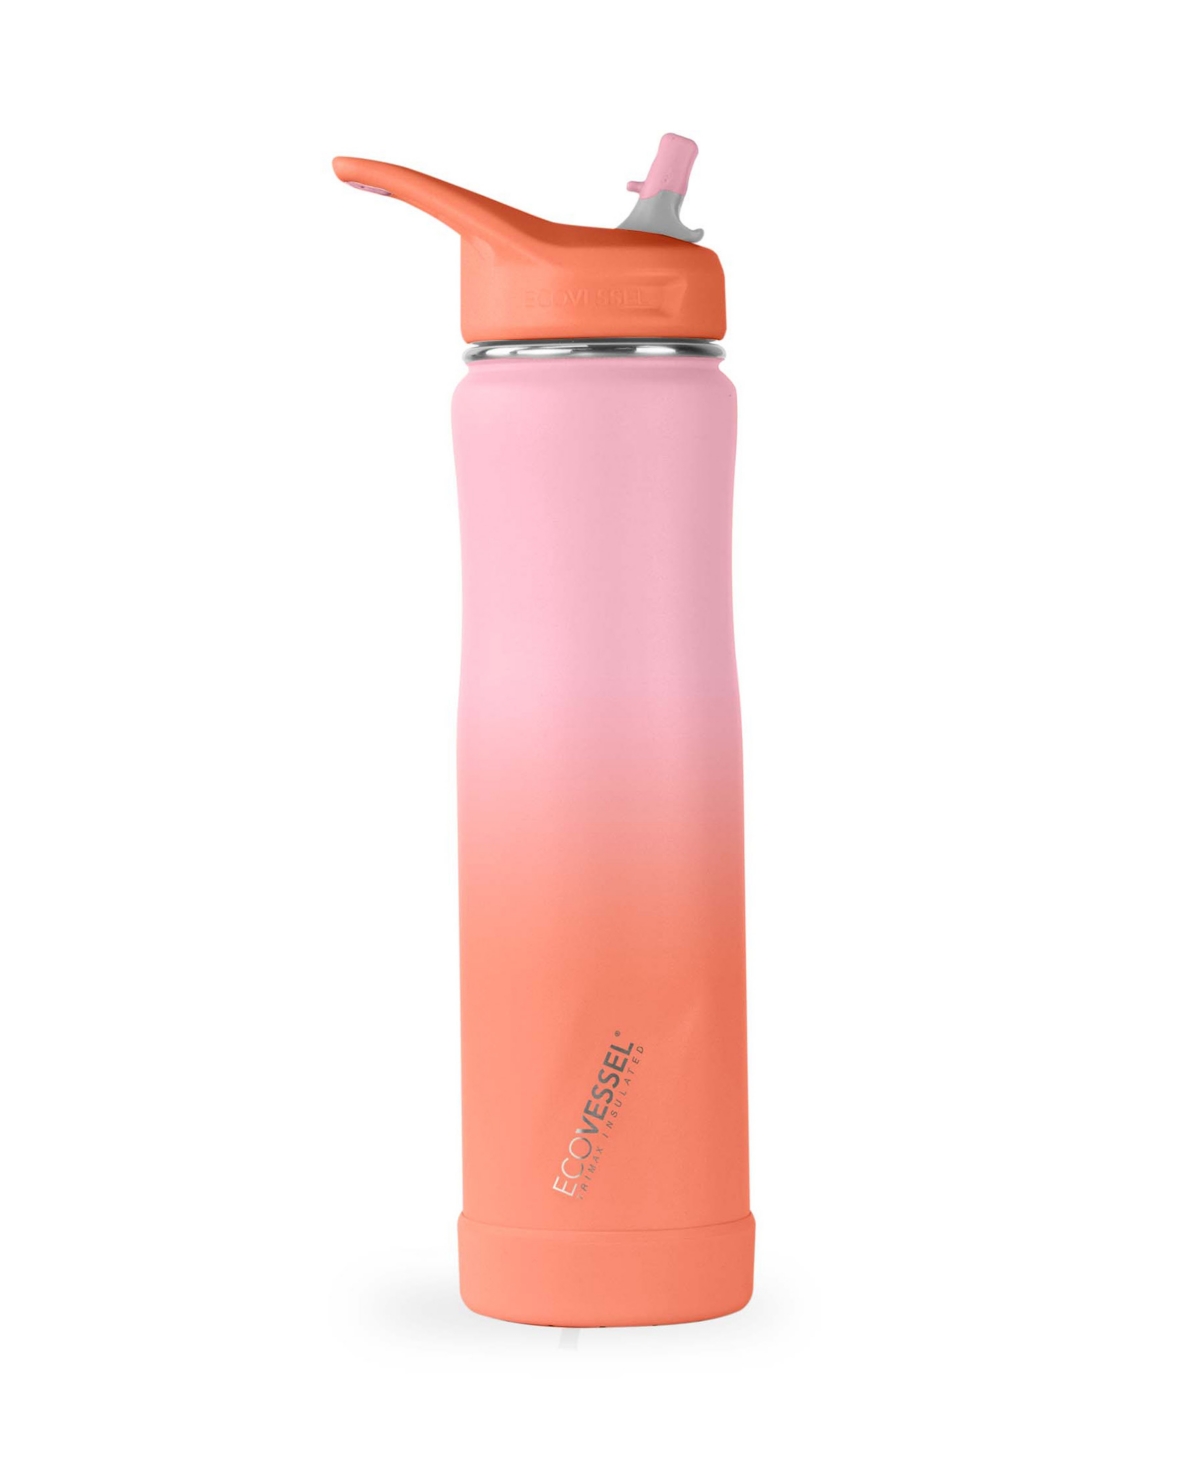 Ecovessel Summit Trimax Insulated Stainless Steel Bottle With Flip Straw Lid And Silicone Bumper, 24 oz In Coral Sand